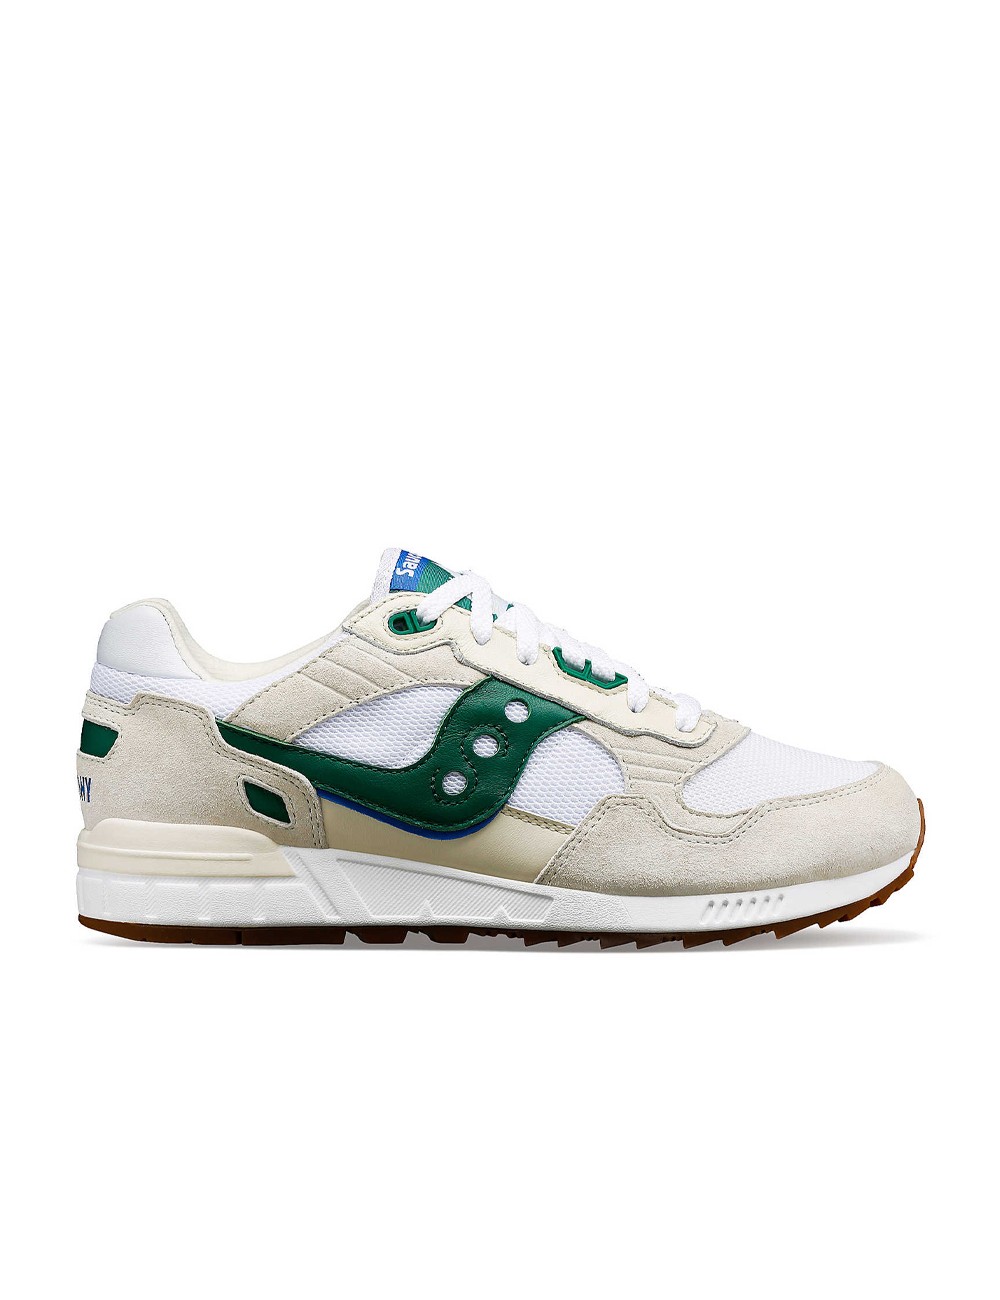 Saucony Shadow 5000 White Green S70637-7